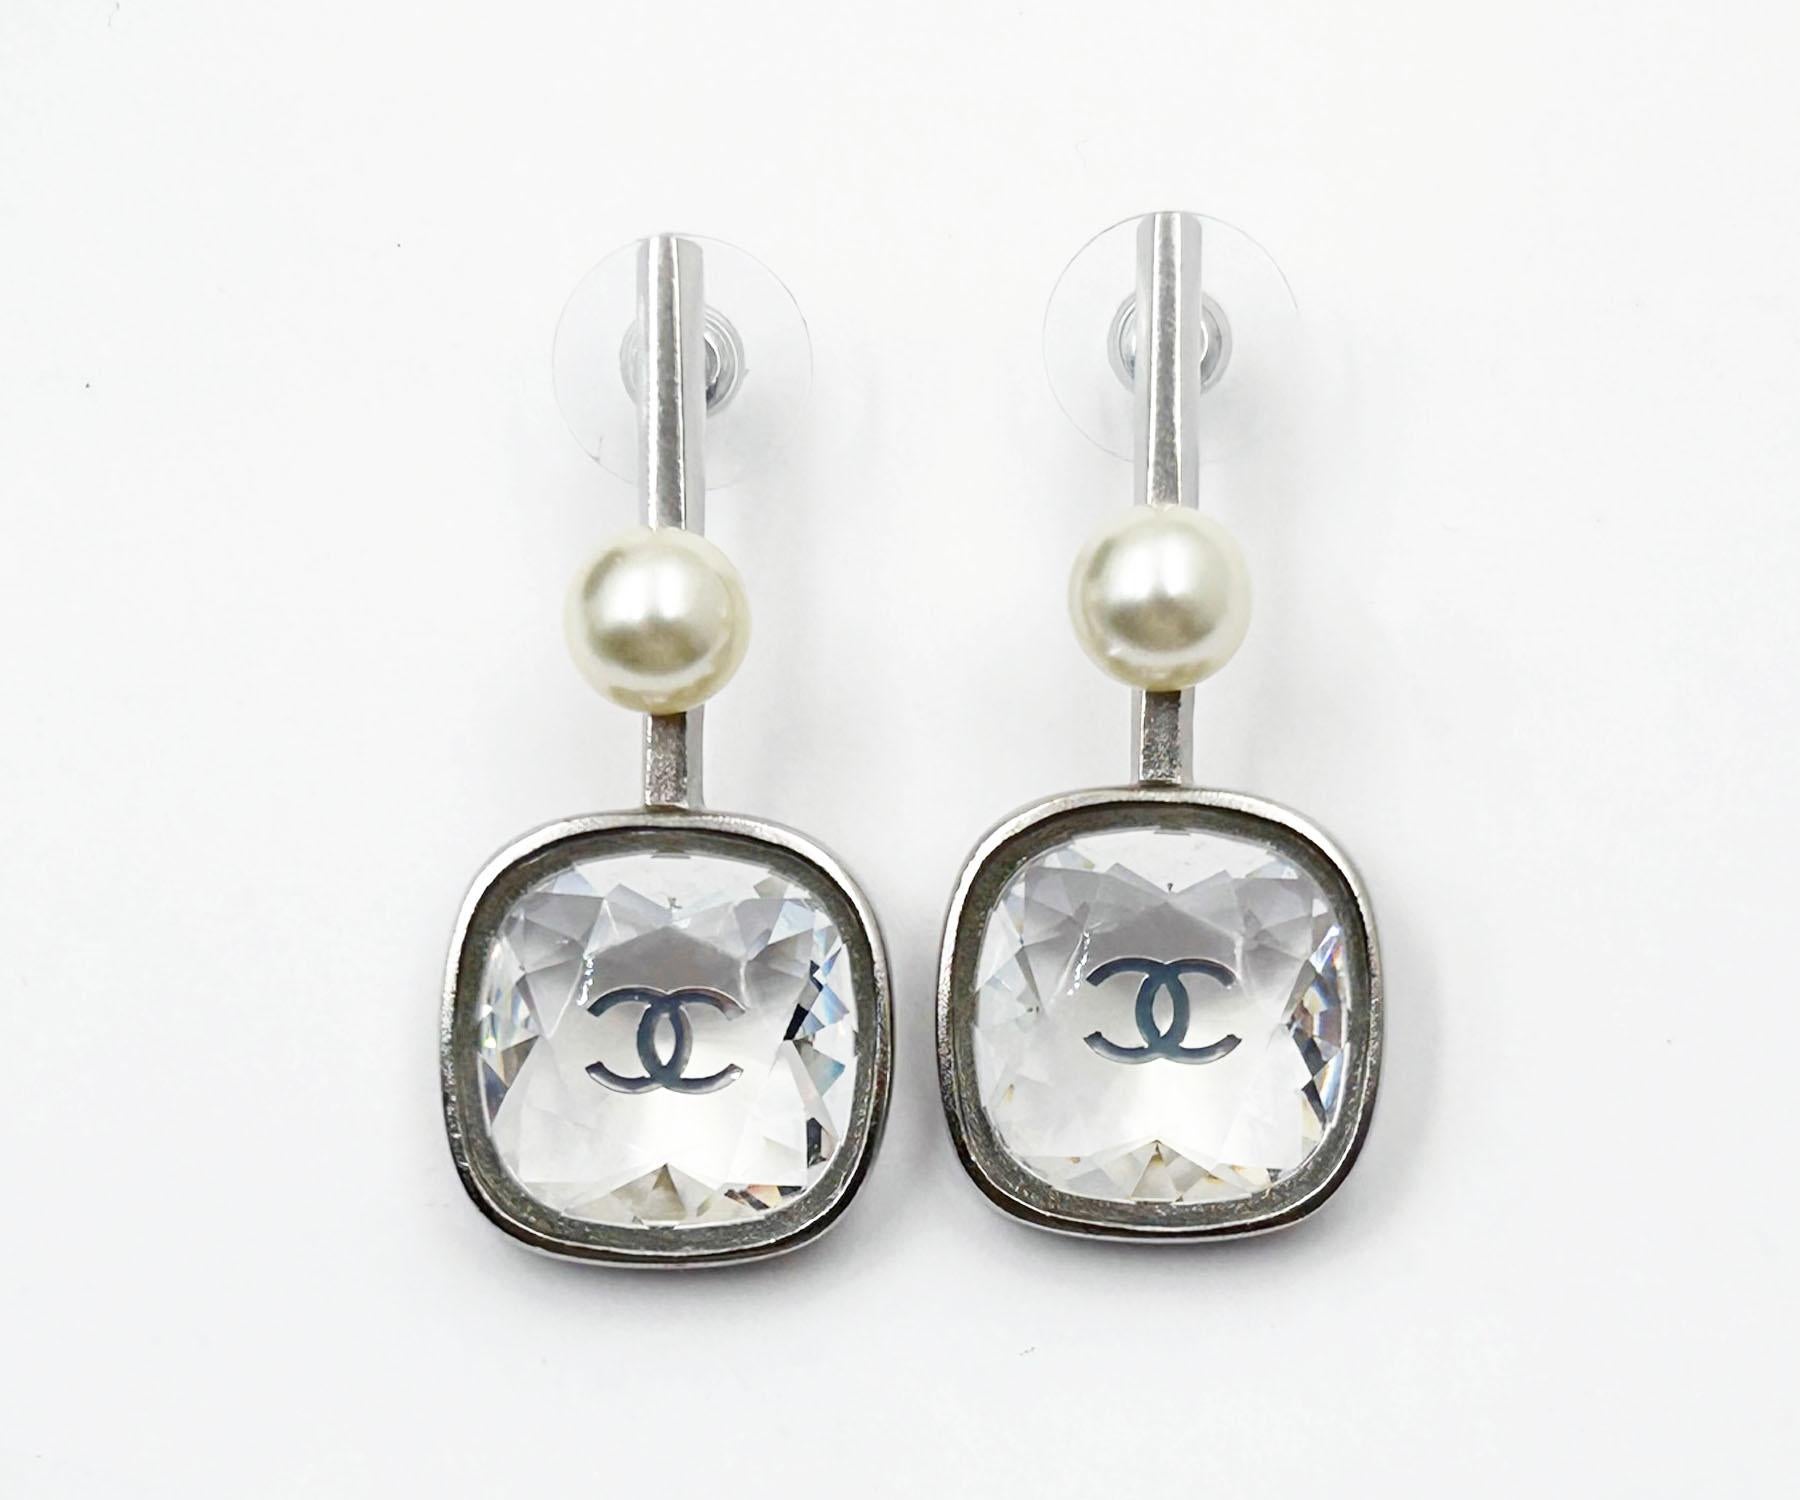 Chanel Silver CC Princess Crystal Geo Pearl Large Drop Piercing Earrings

*Marked 18
*Made in France
*Comes with the original box and pouch

-It is approximately 0.75